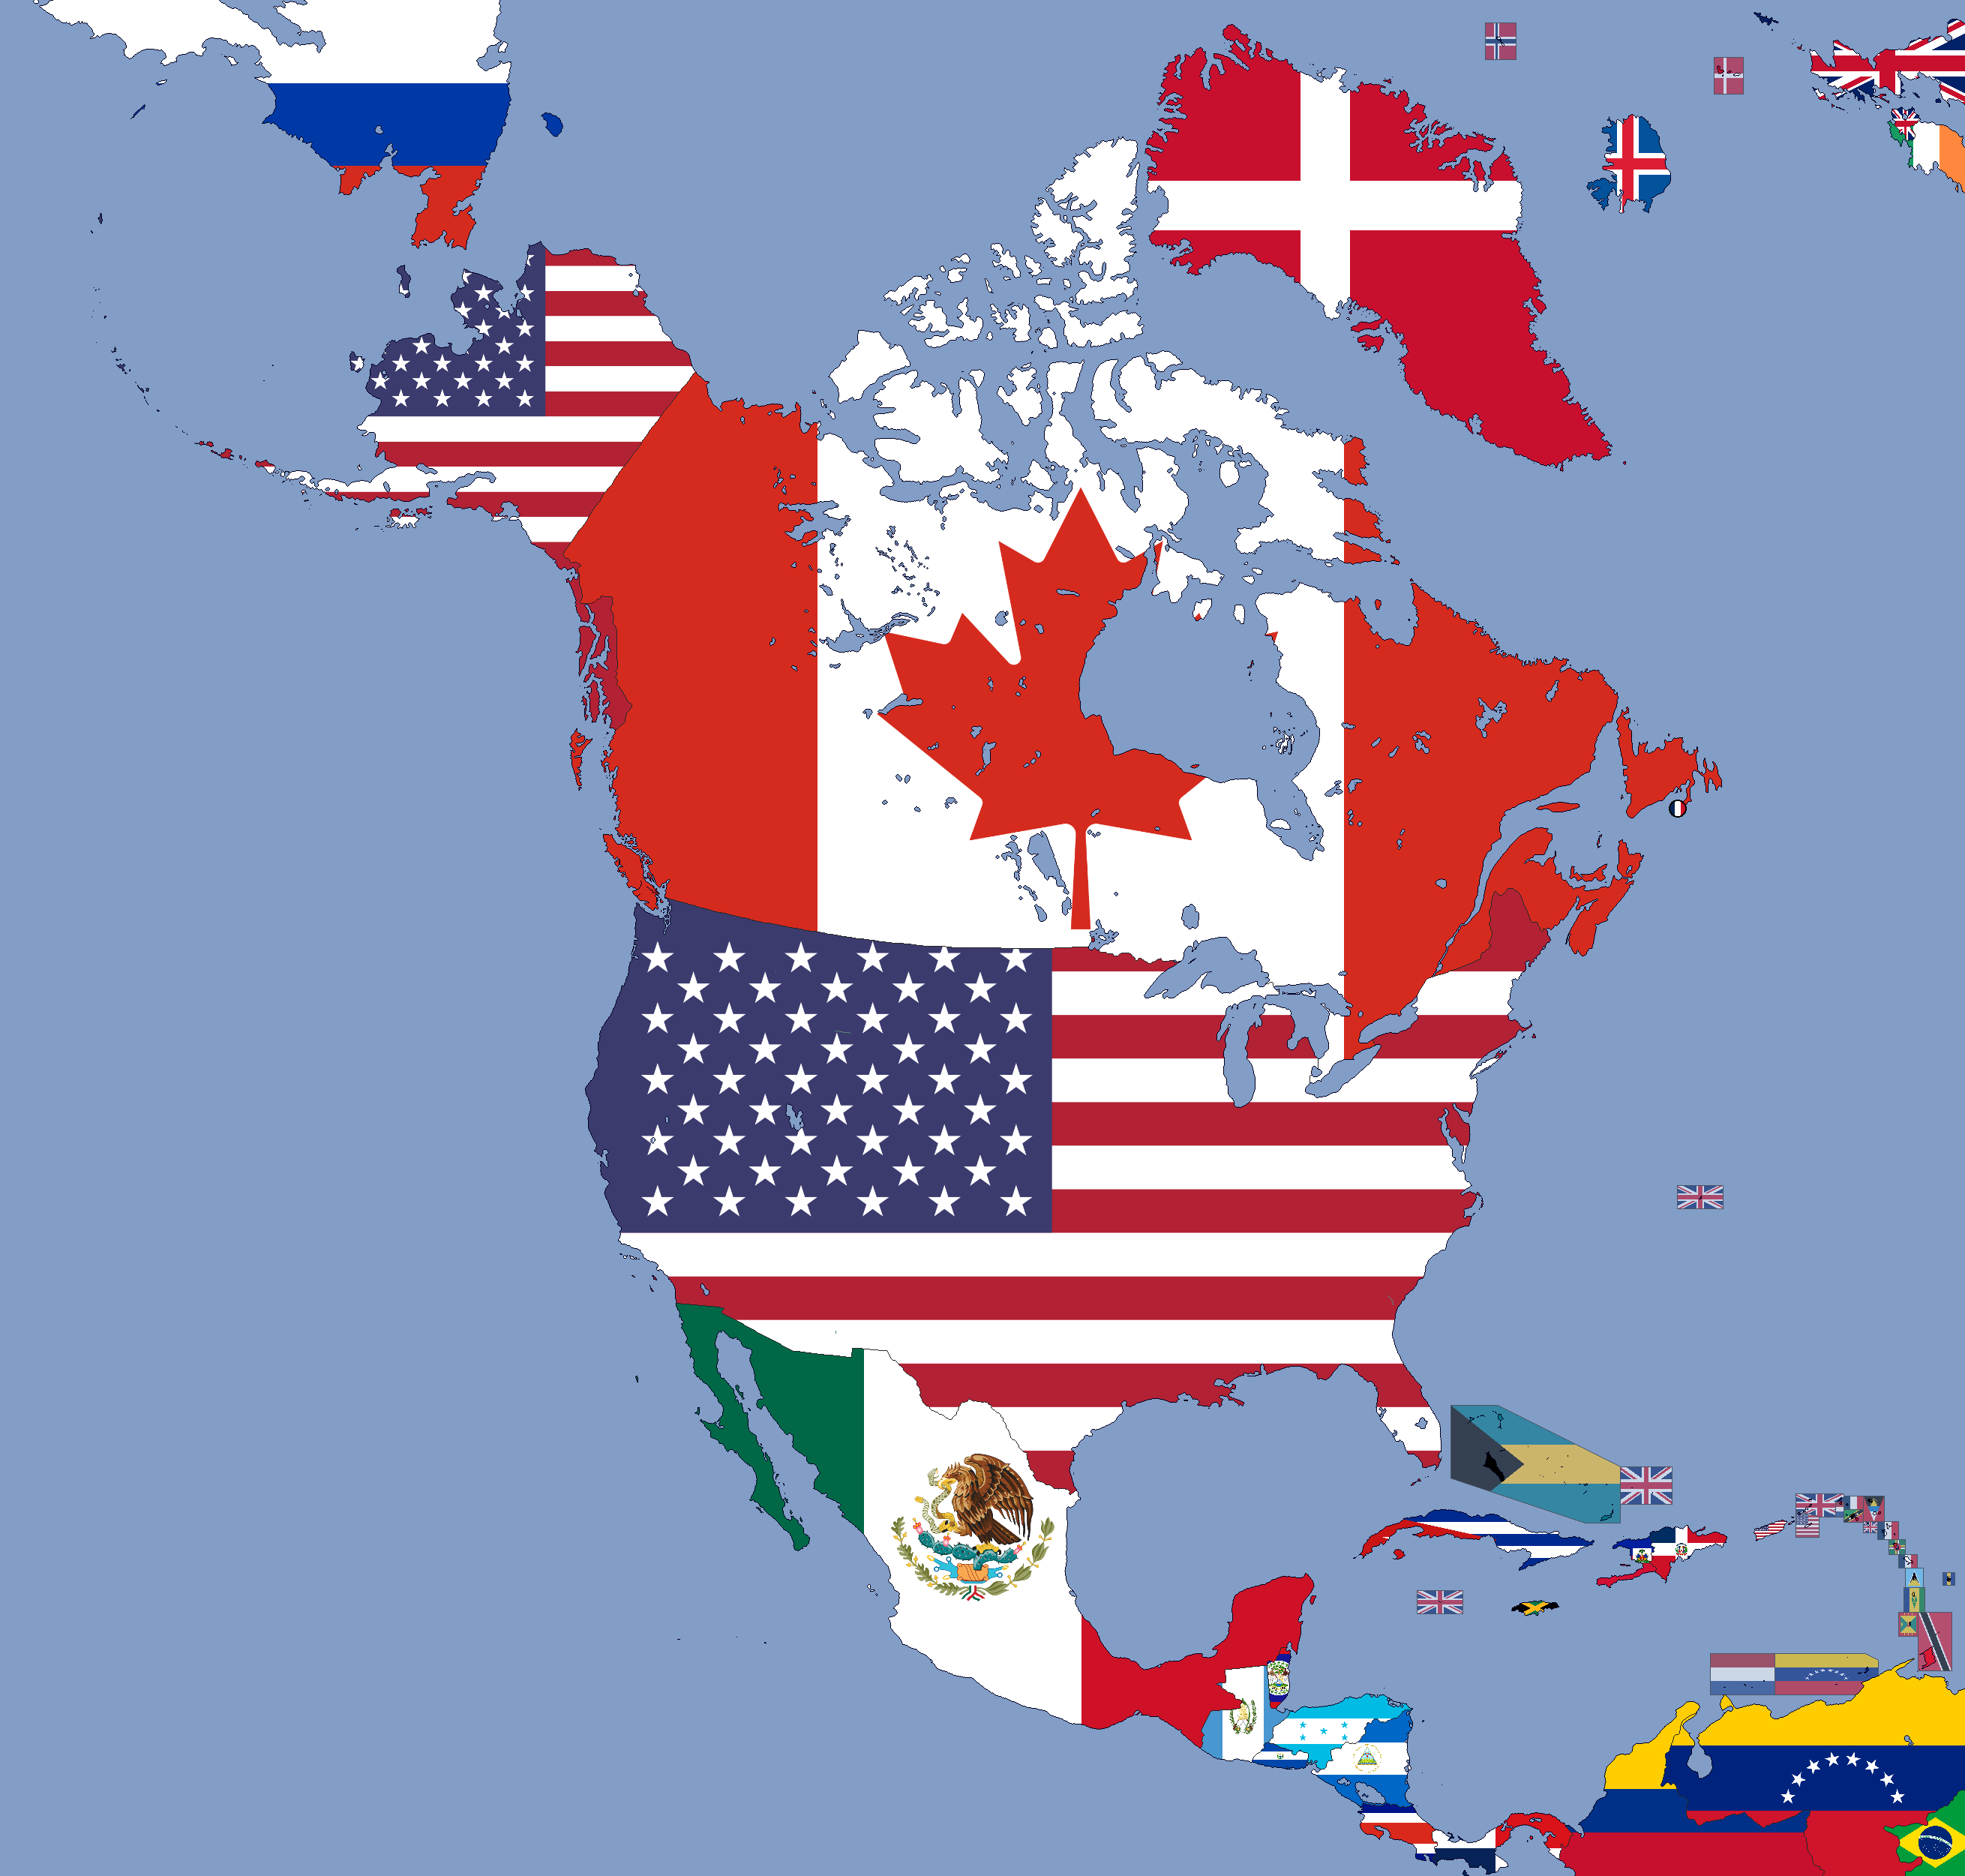 Pros and Cons of NAFTA - North American Free Trade Agreement